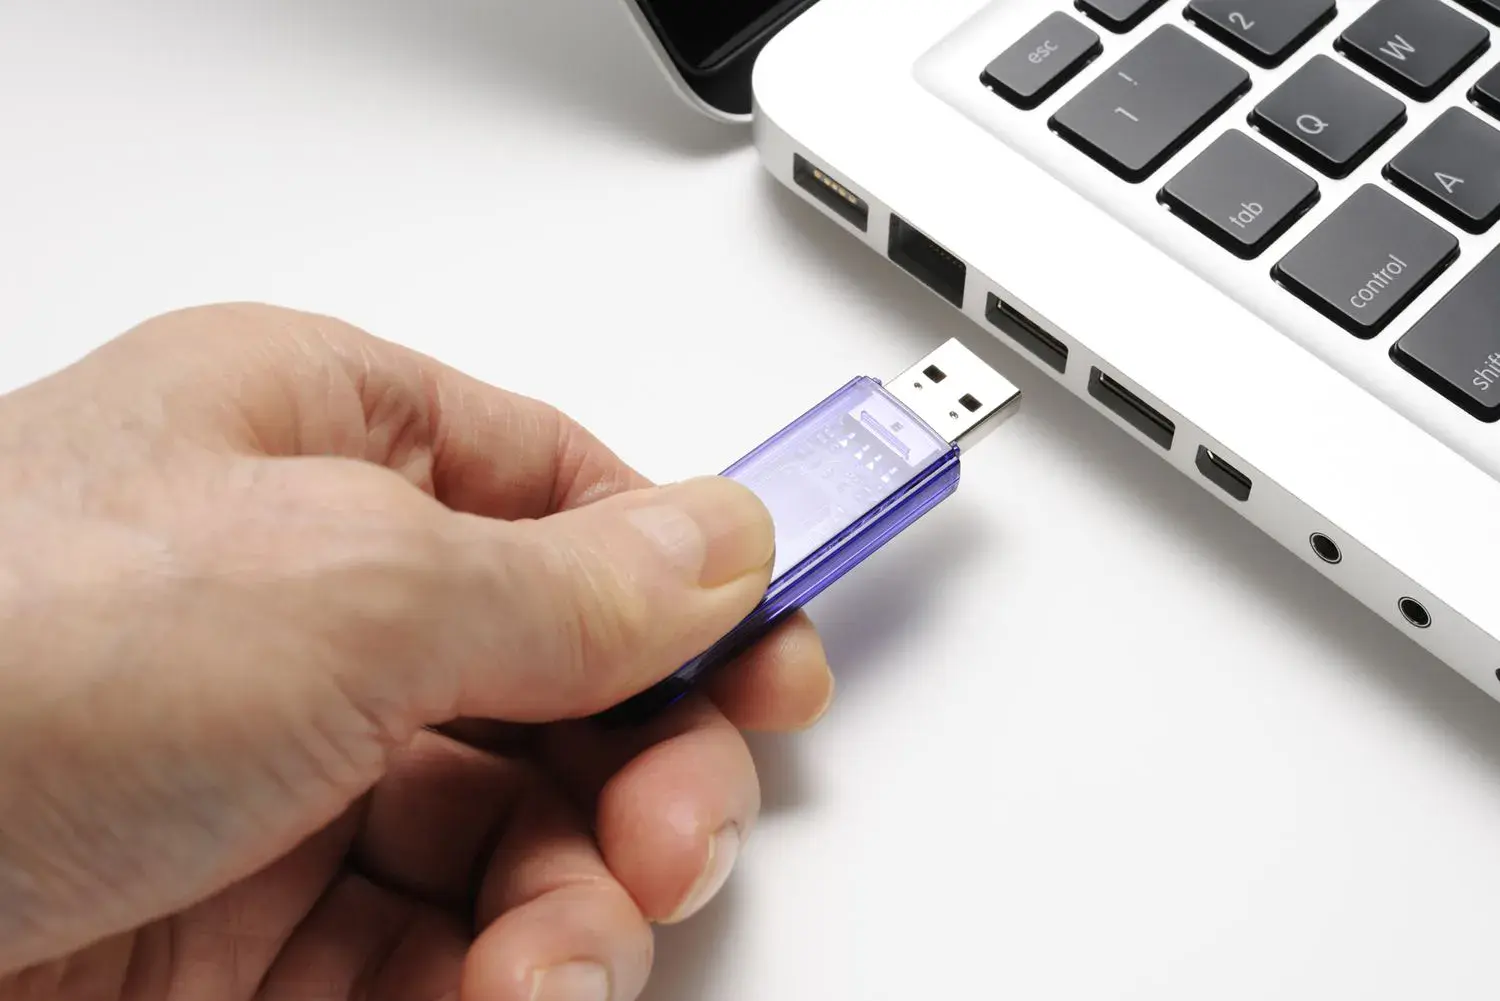 What is a USB Device